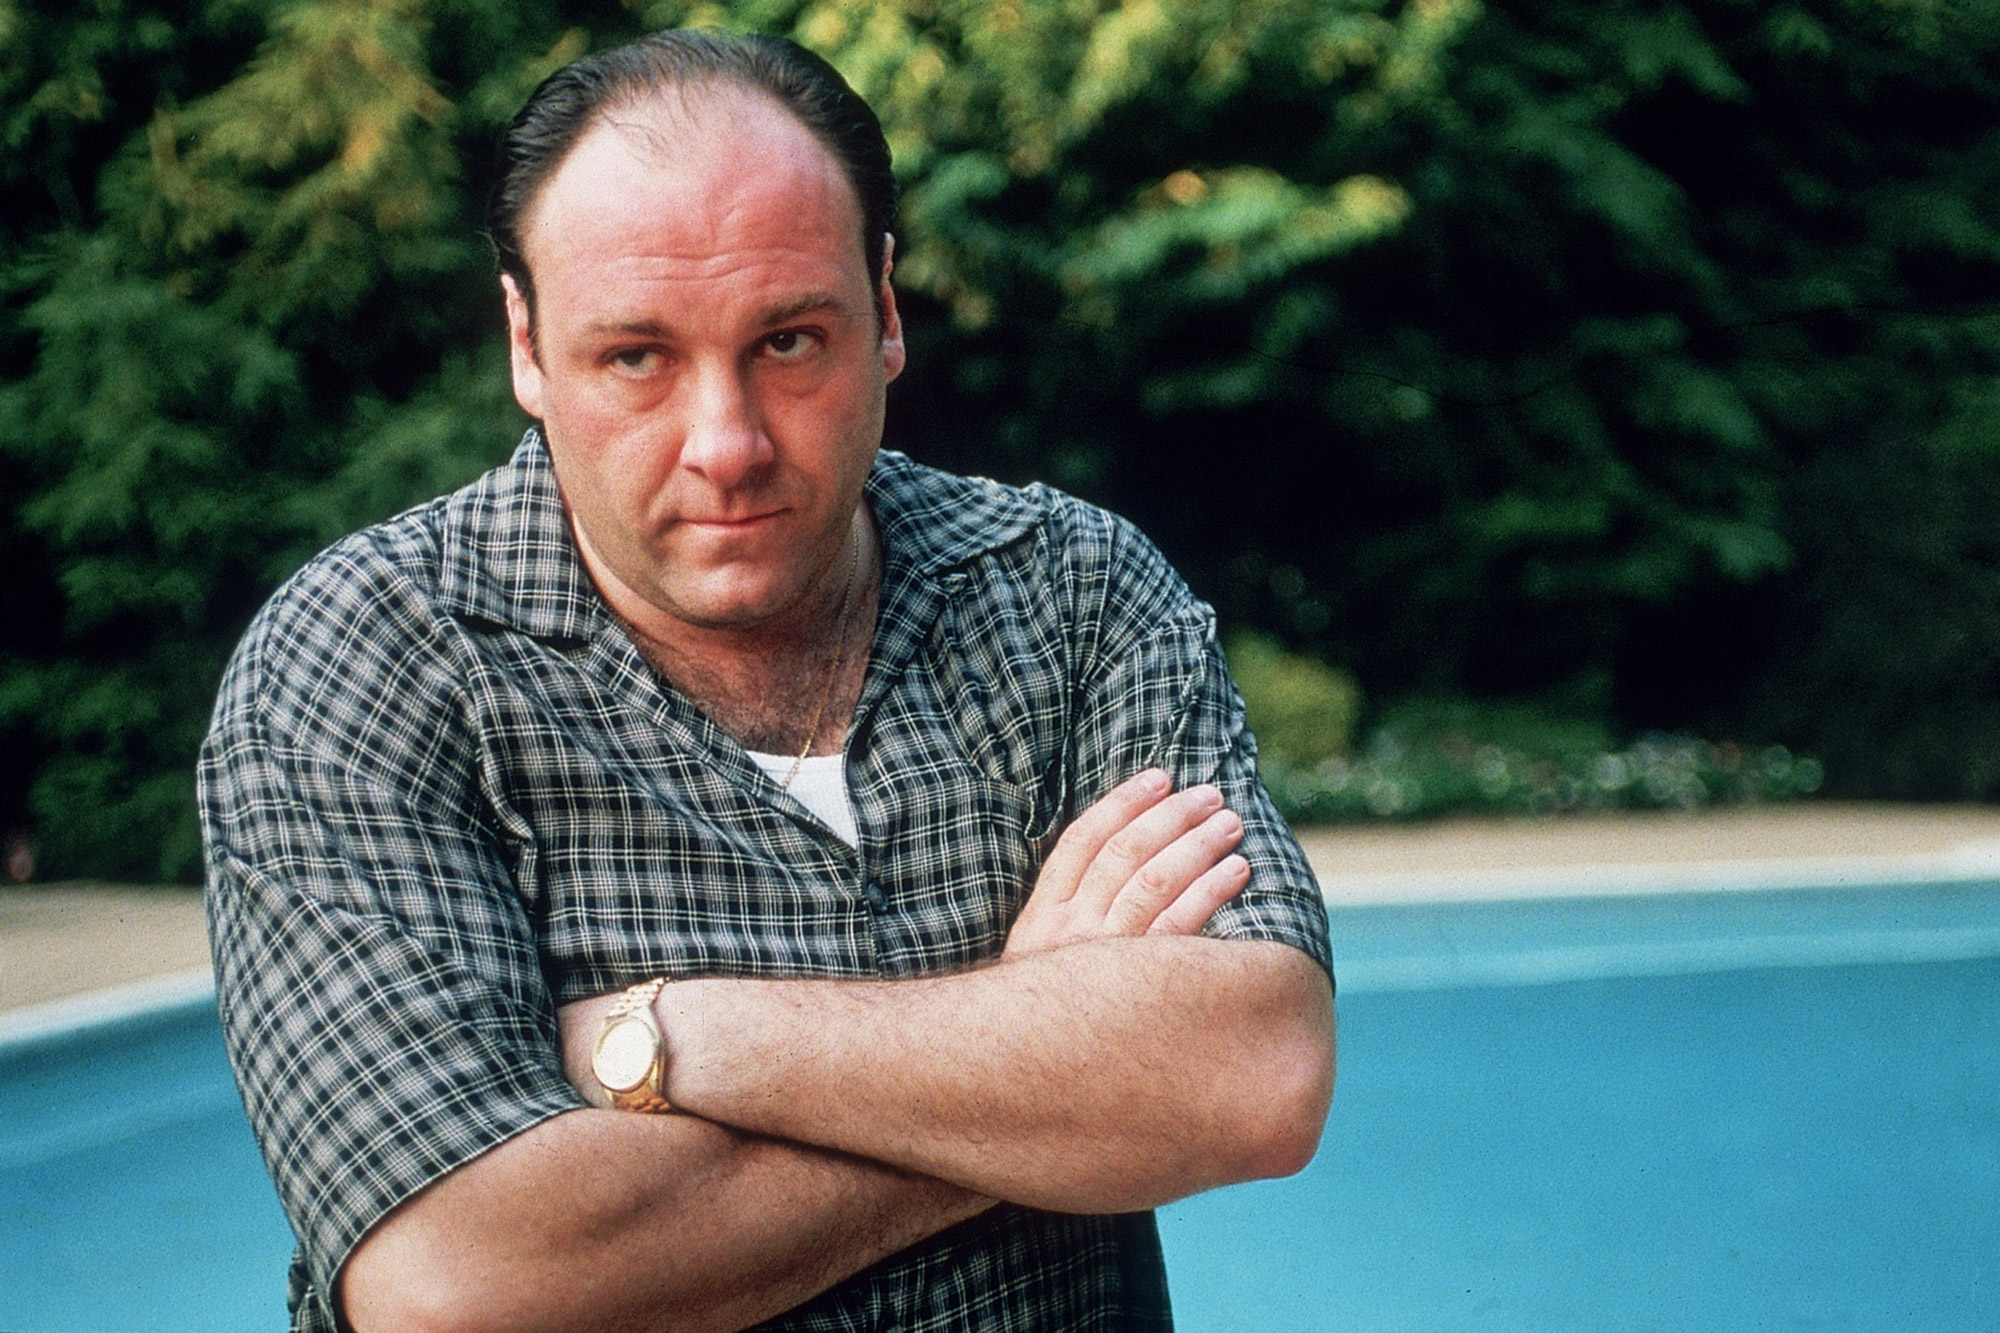 Actor James Gandolfini in scene from HBO TV drama series The Sopranos.    (Photo by Anthony Neste/Getty Images)